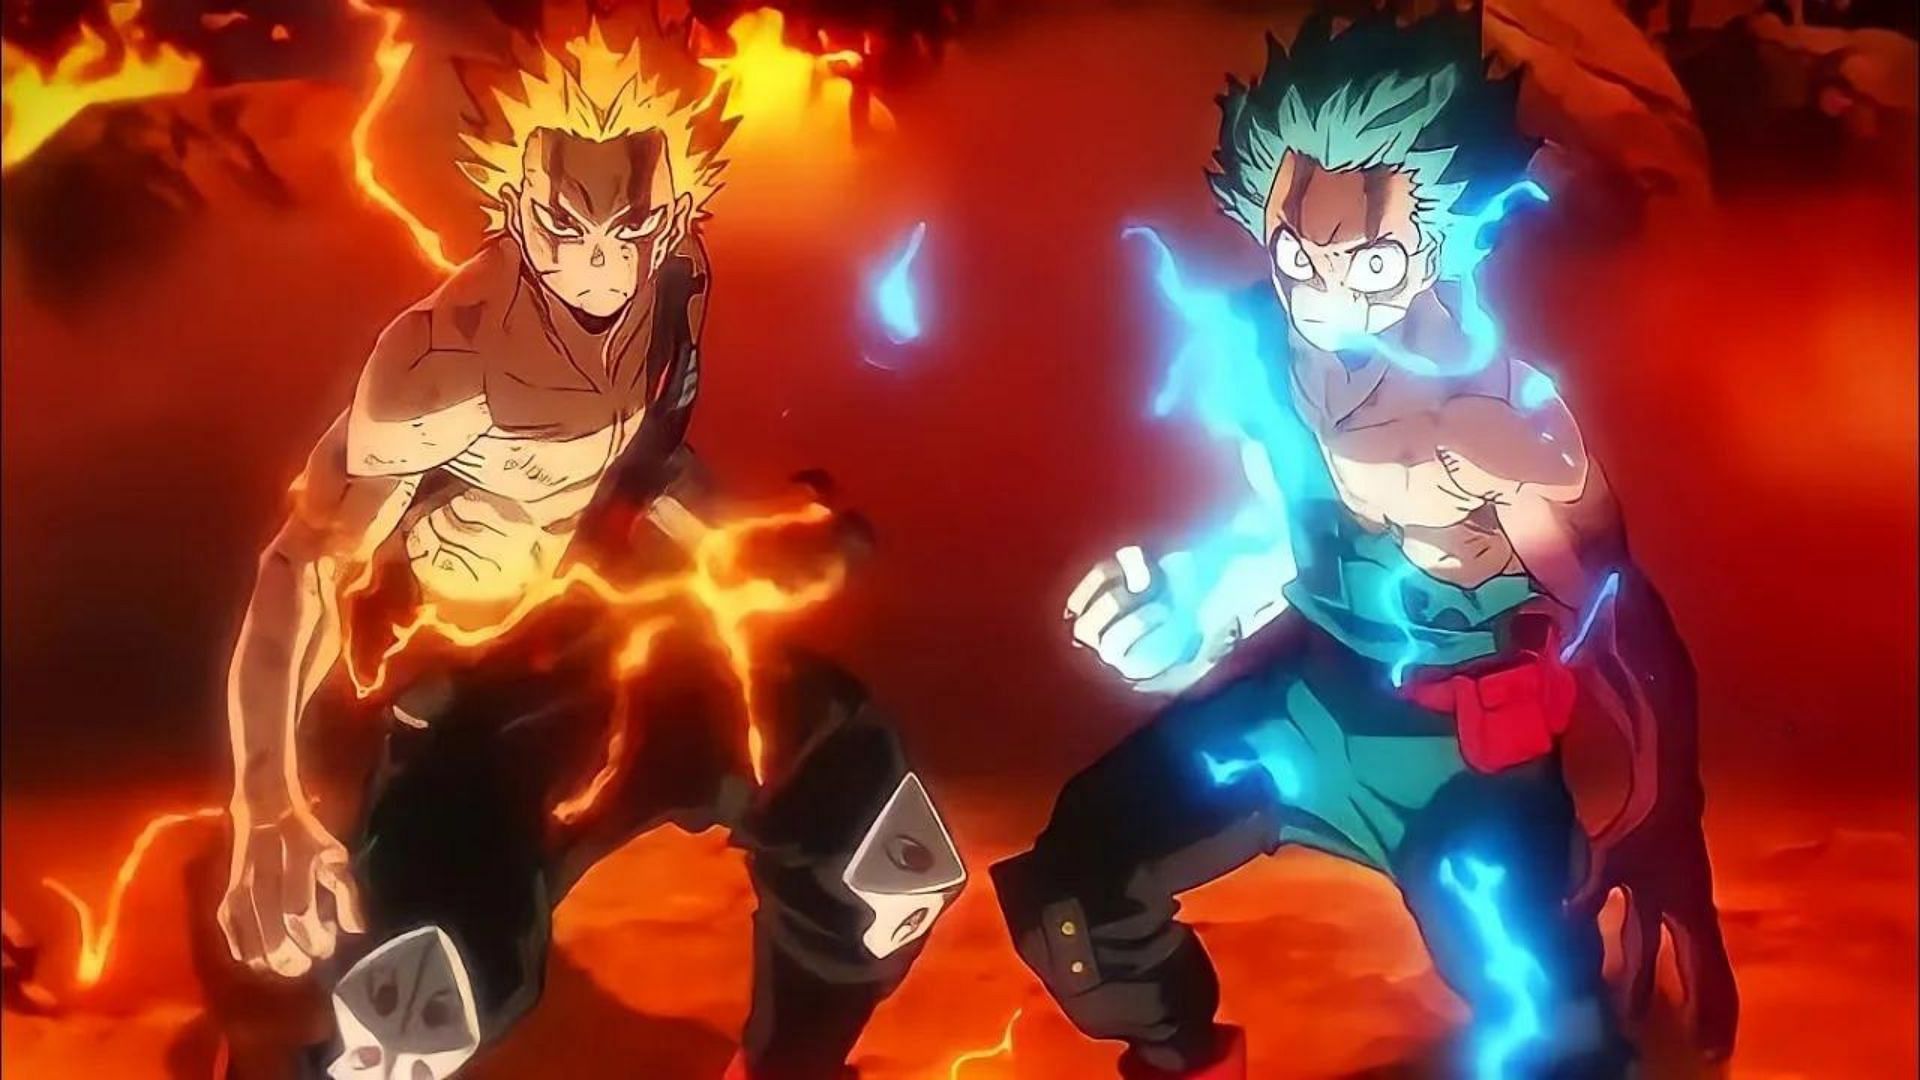 Horikoshi continues building up Heroes Rising as the film that represents My Hero Academia best